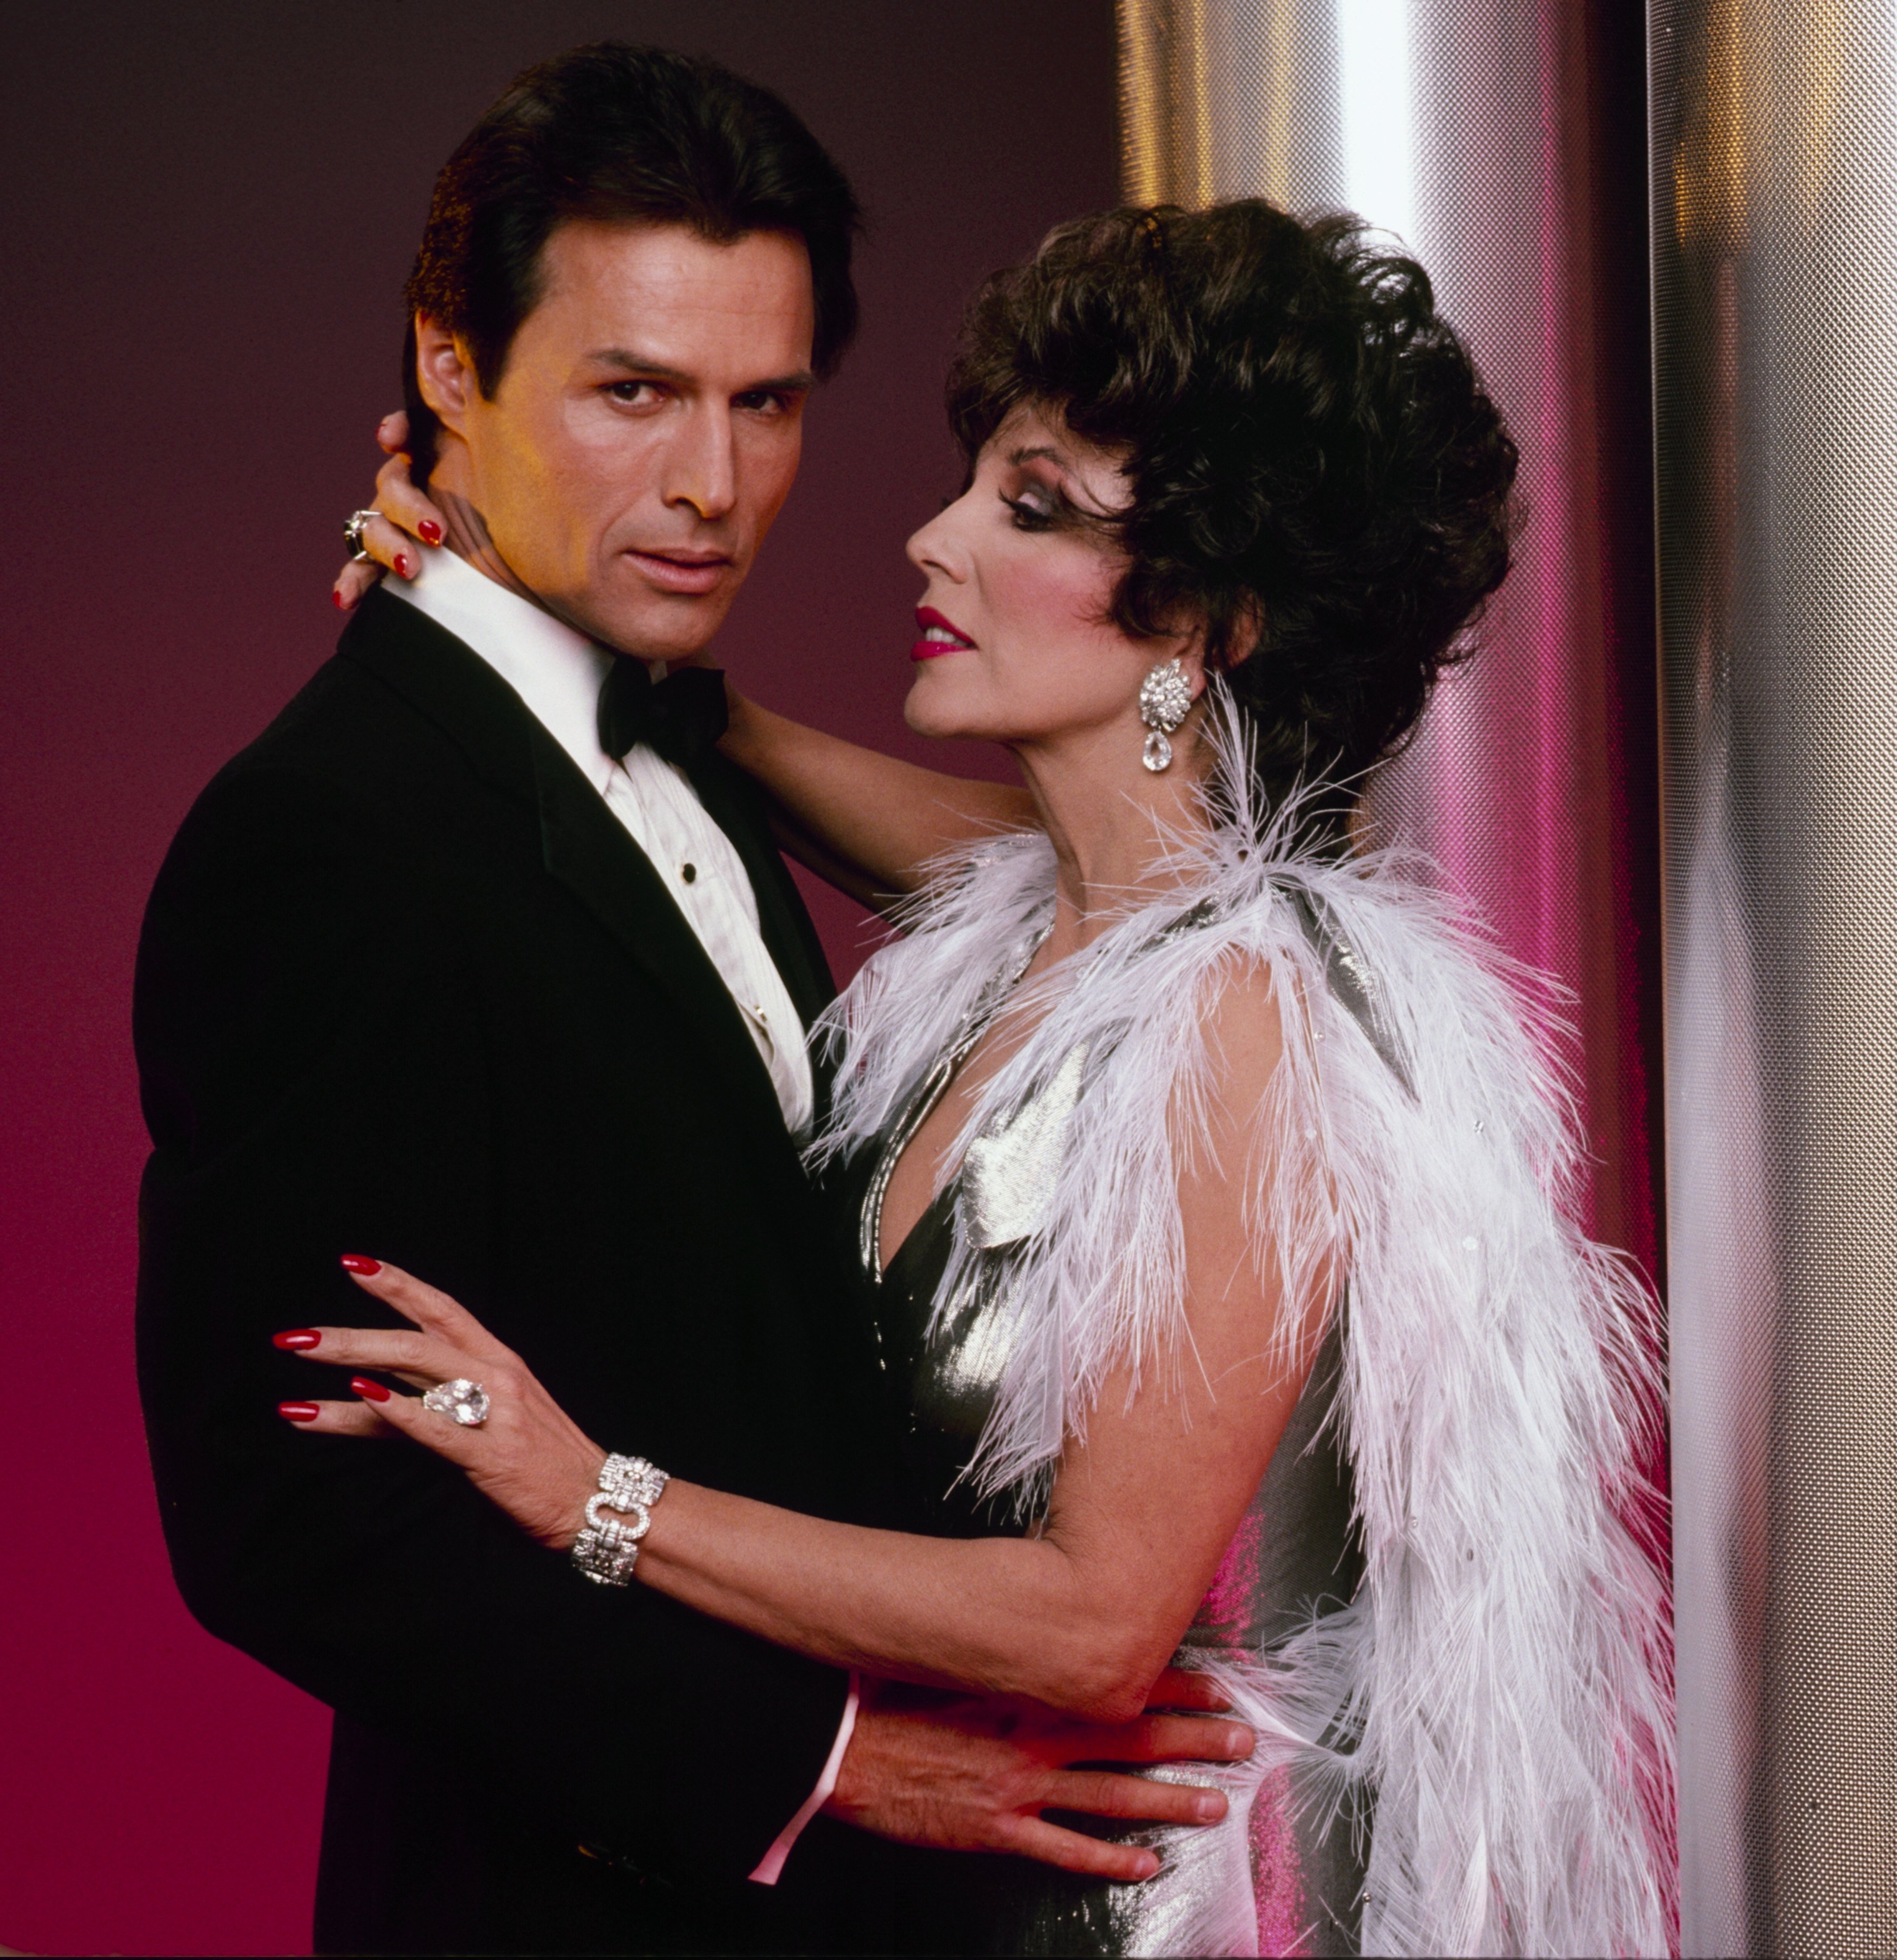 Dynasty Fotoshooting-Joan Collins mit Michael Nader | Quelle: Getty Images